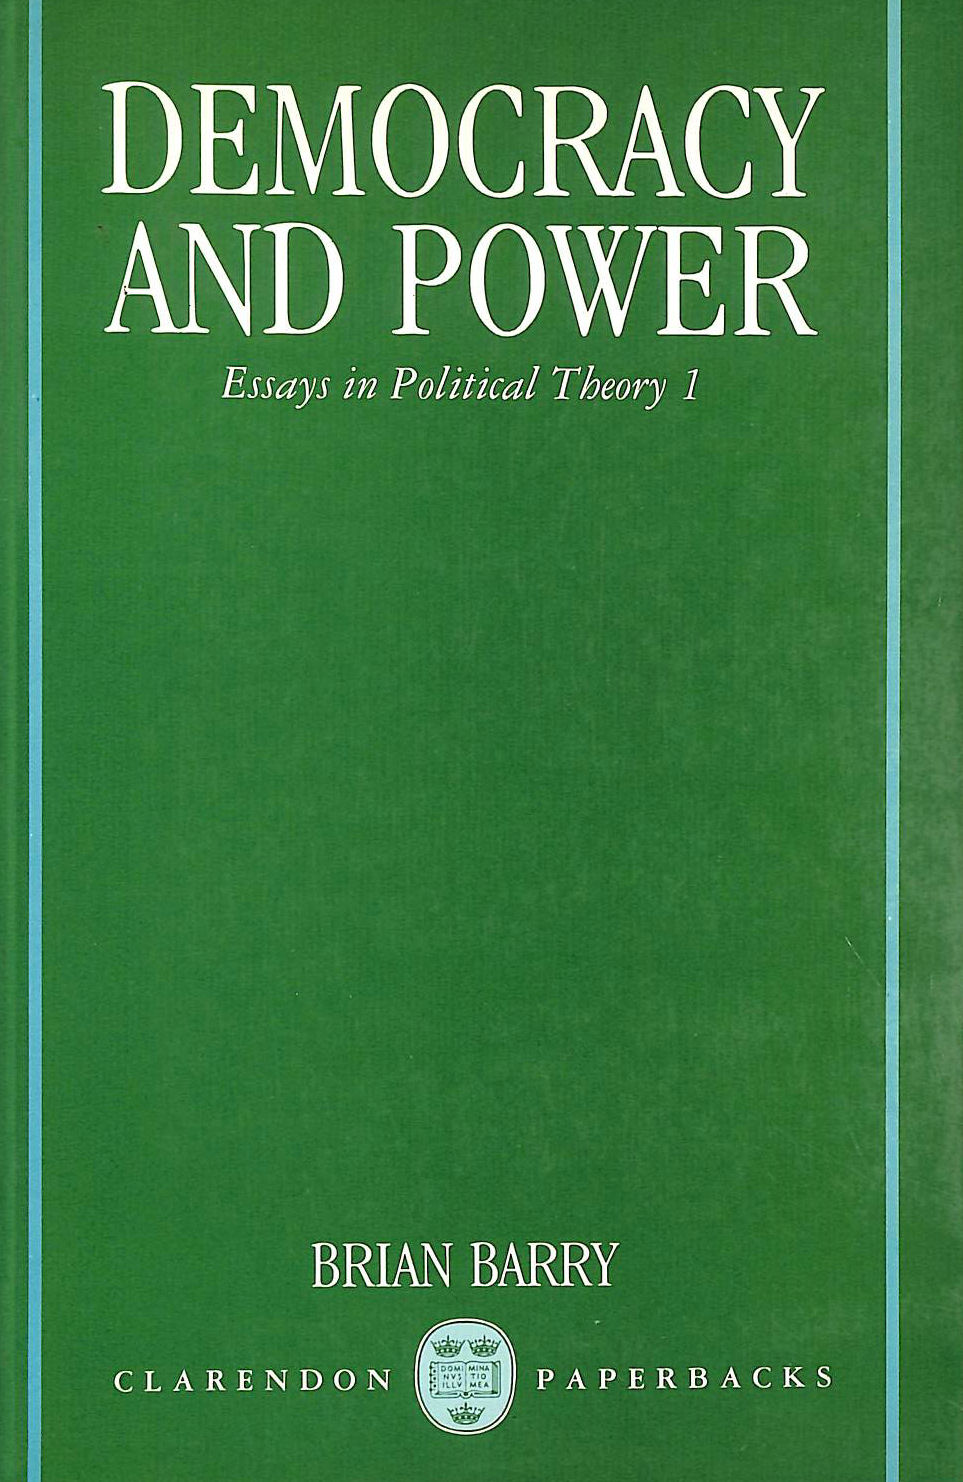 BRIAN BARRY - Democracy and Power (Pt. 1) (Clarendon Paperbacks)